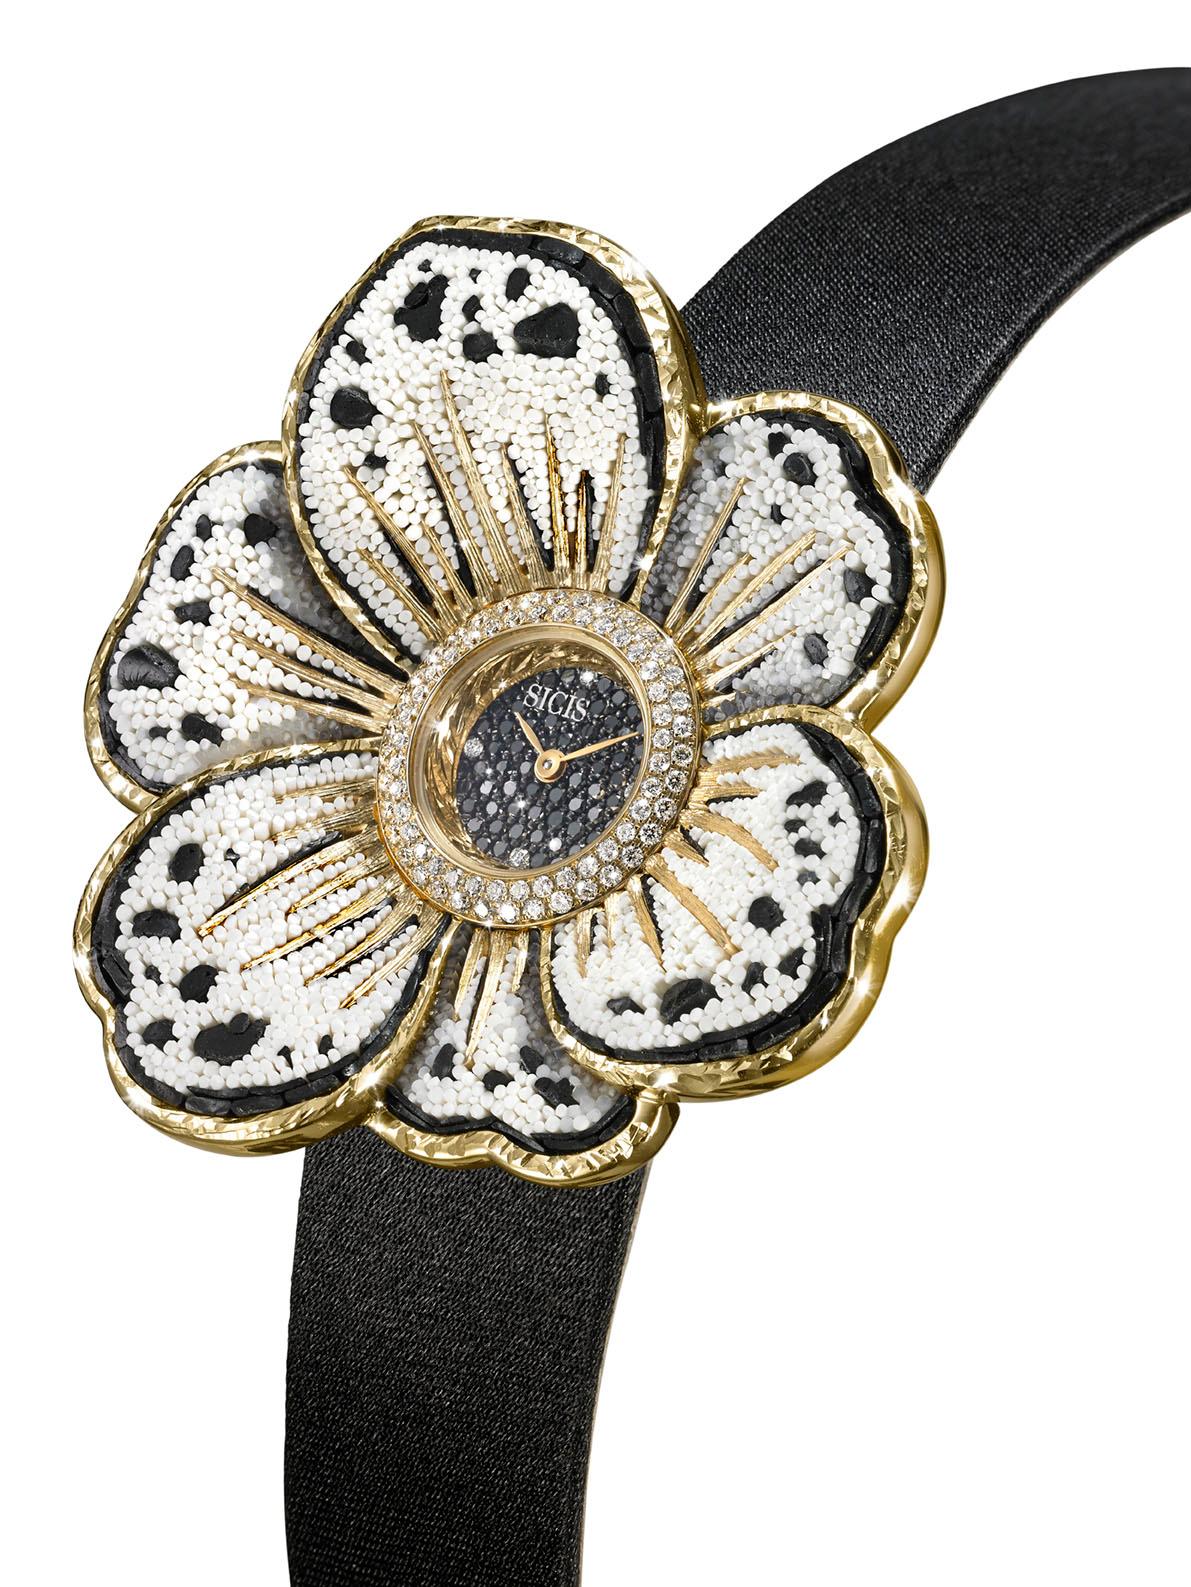 Brilliant Cut Watch Gold White and Black Diamonds Satin Strap Hand Decorated with Micromosaic For Sale